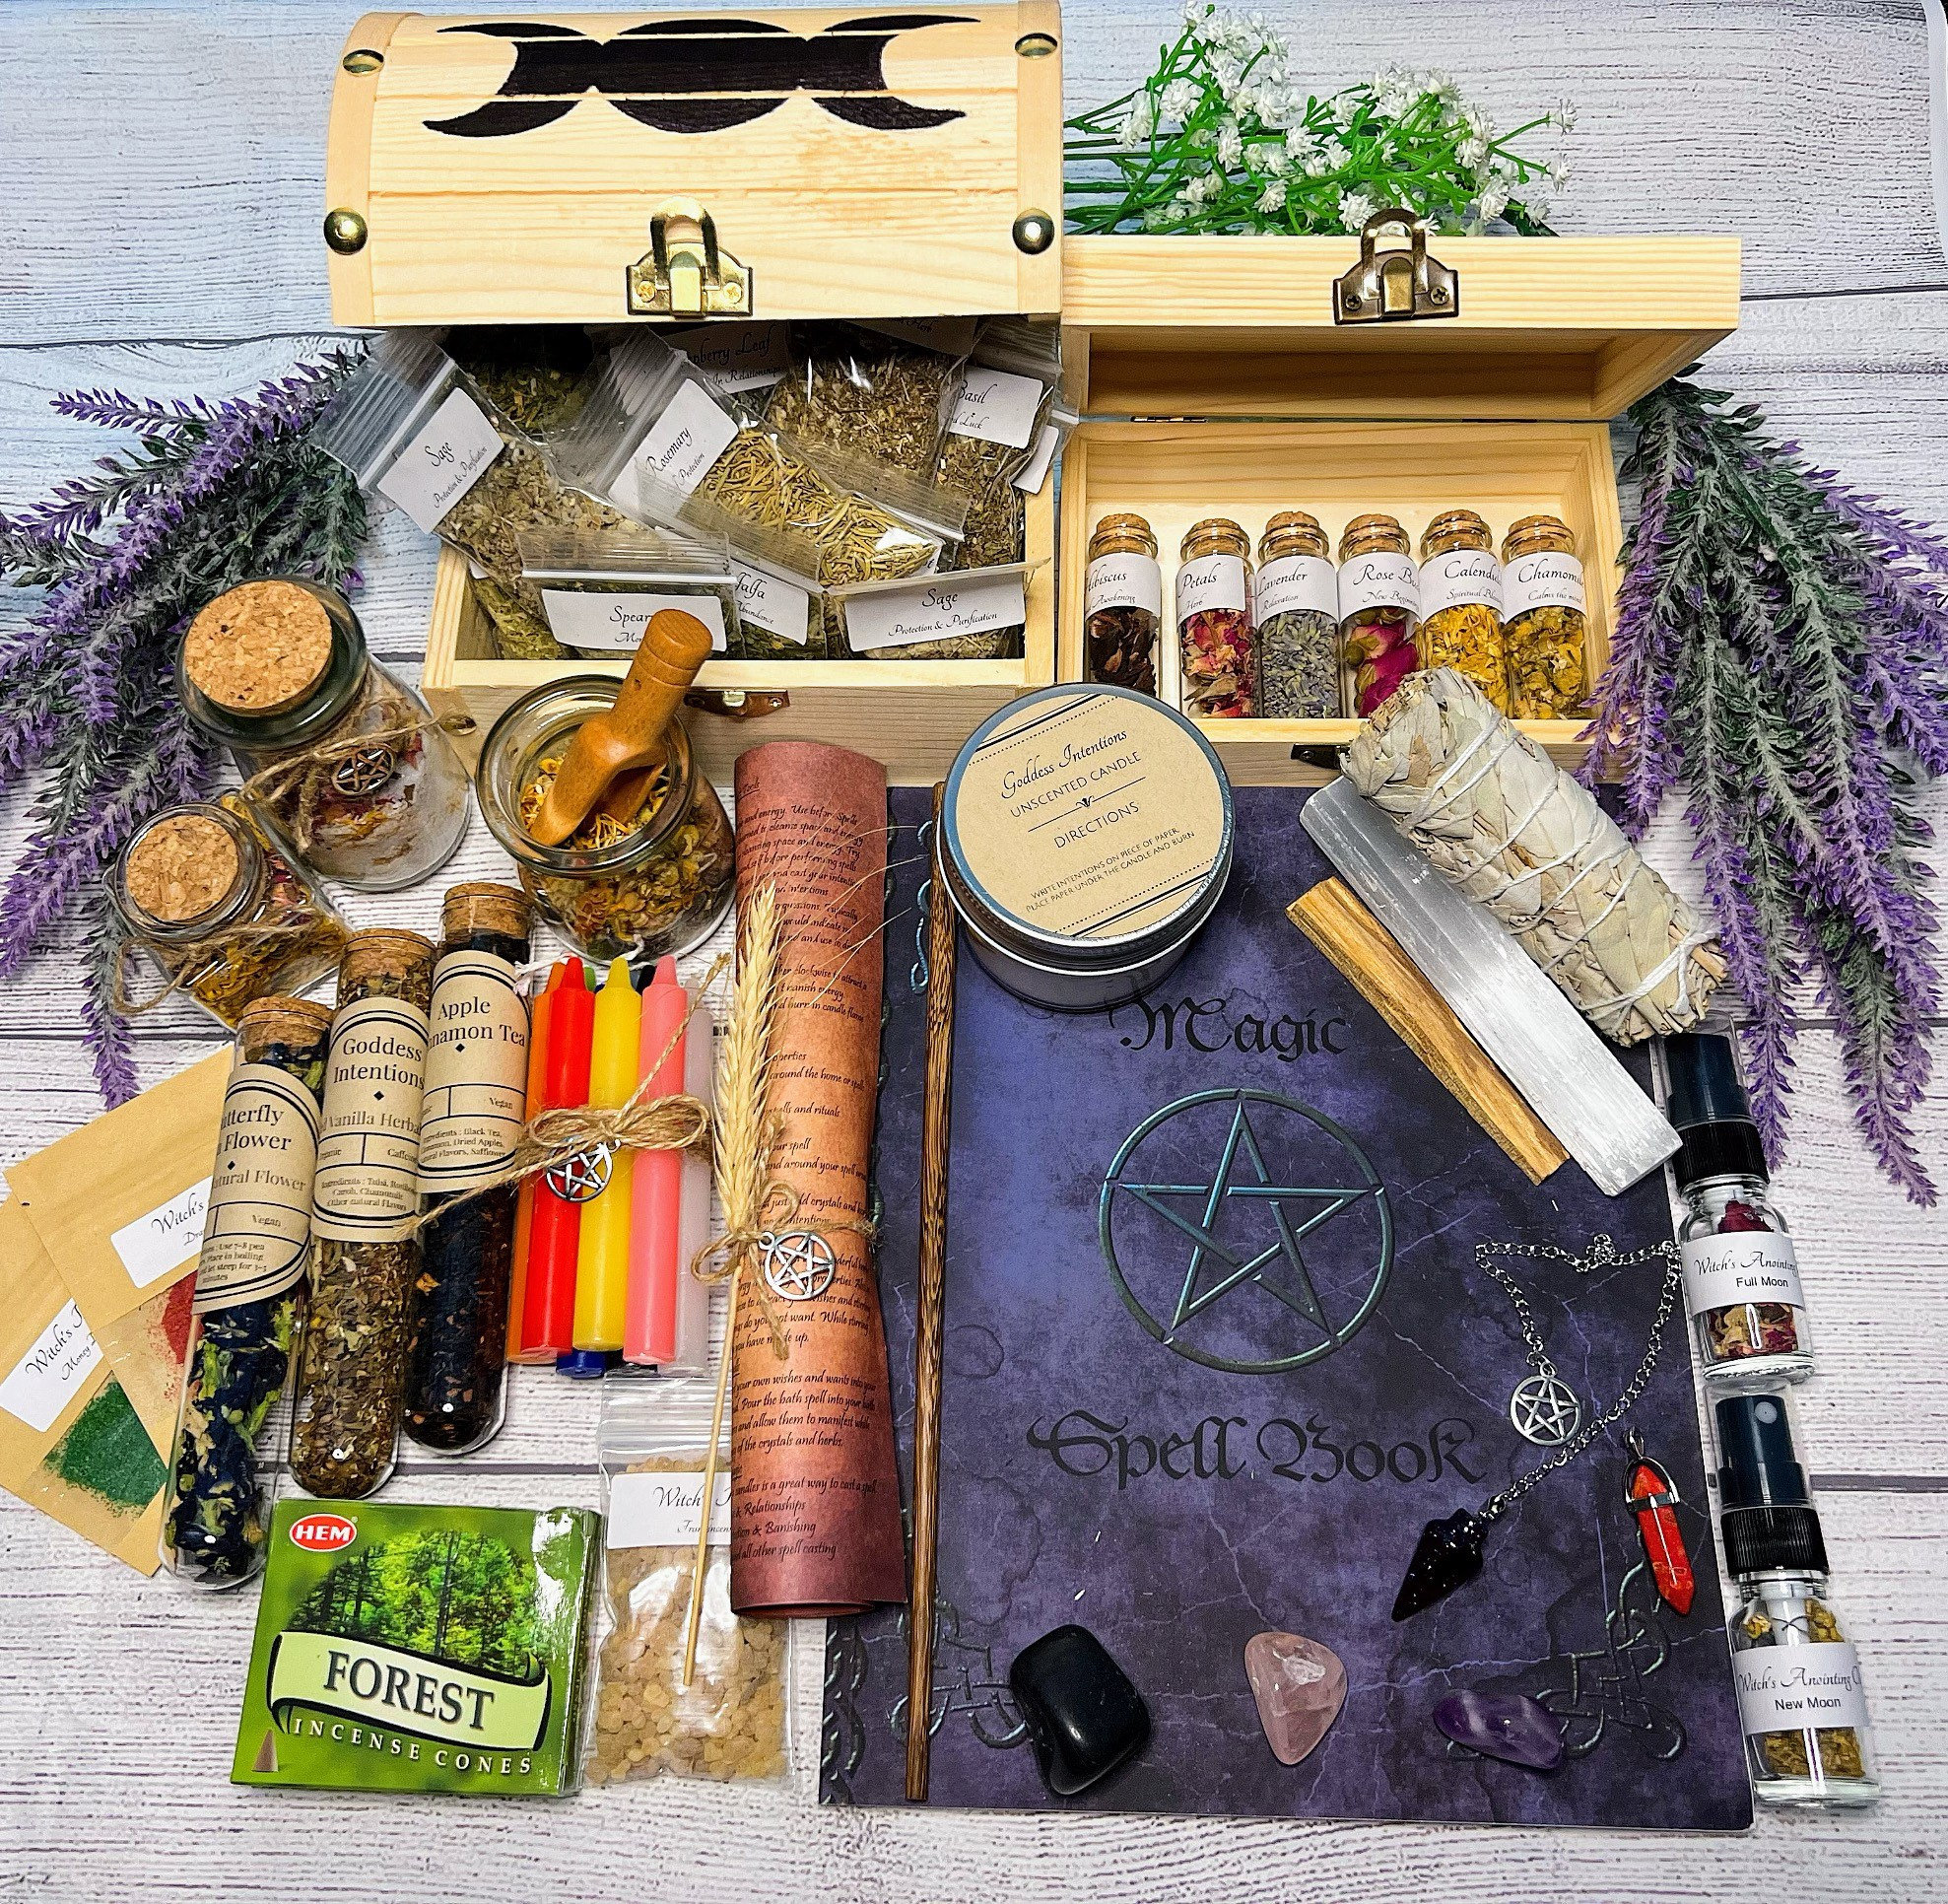 Witchcraft Herbs - 60 Herbs for Witchcraft - Witch Herbs - Witchcraft Kit  of Dried Herbs for Witchcraft - Wiccan Supplies and Tools - Witch Herbs for